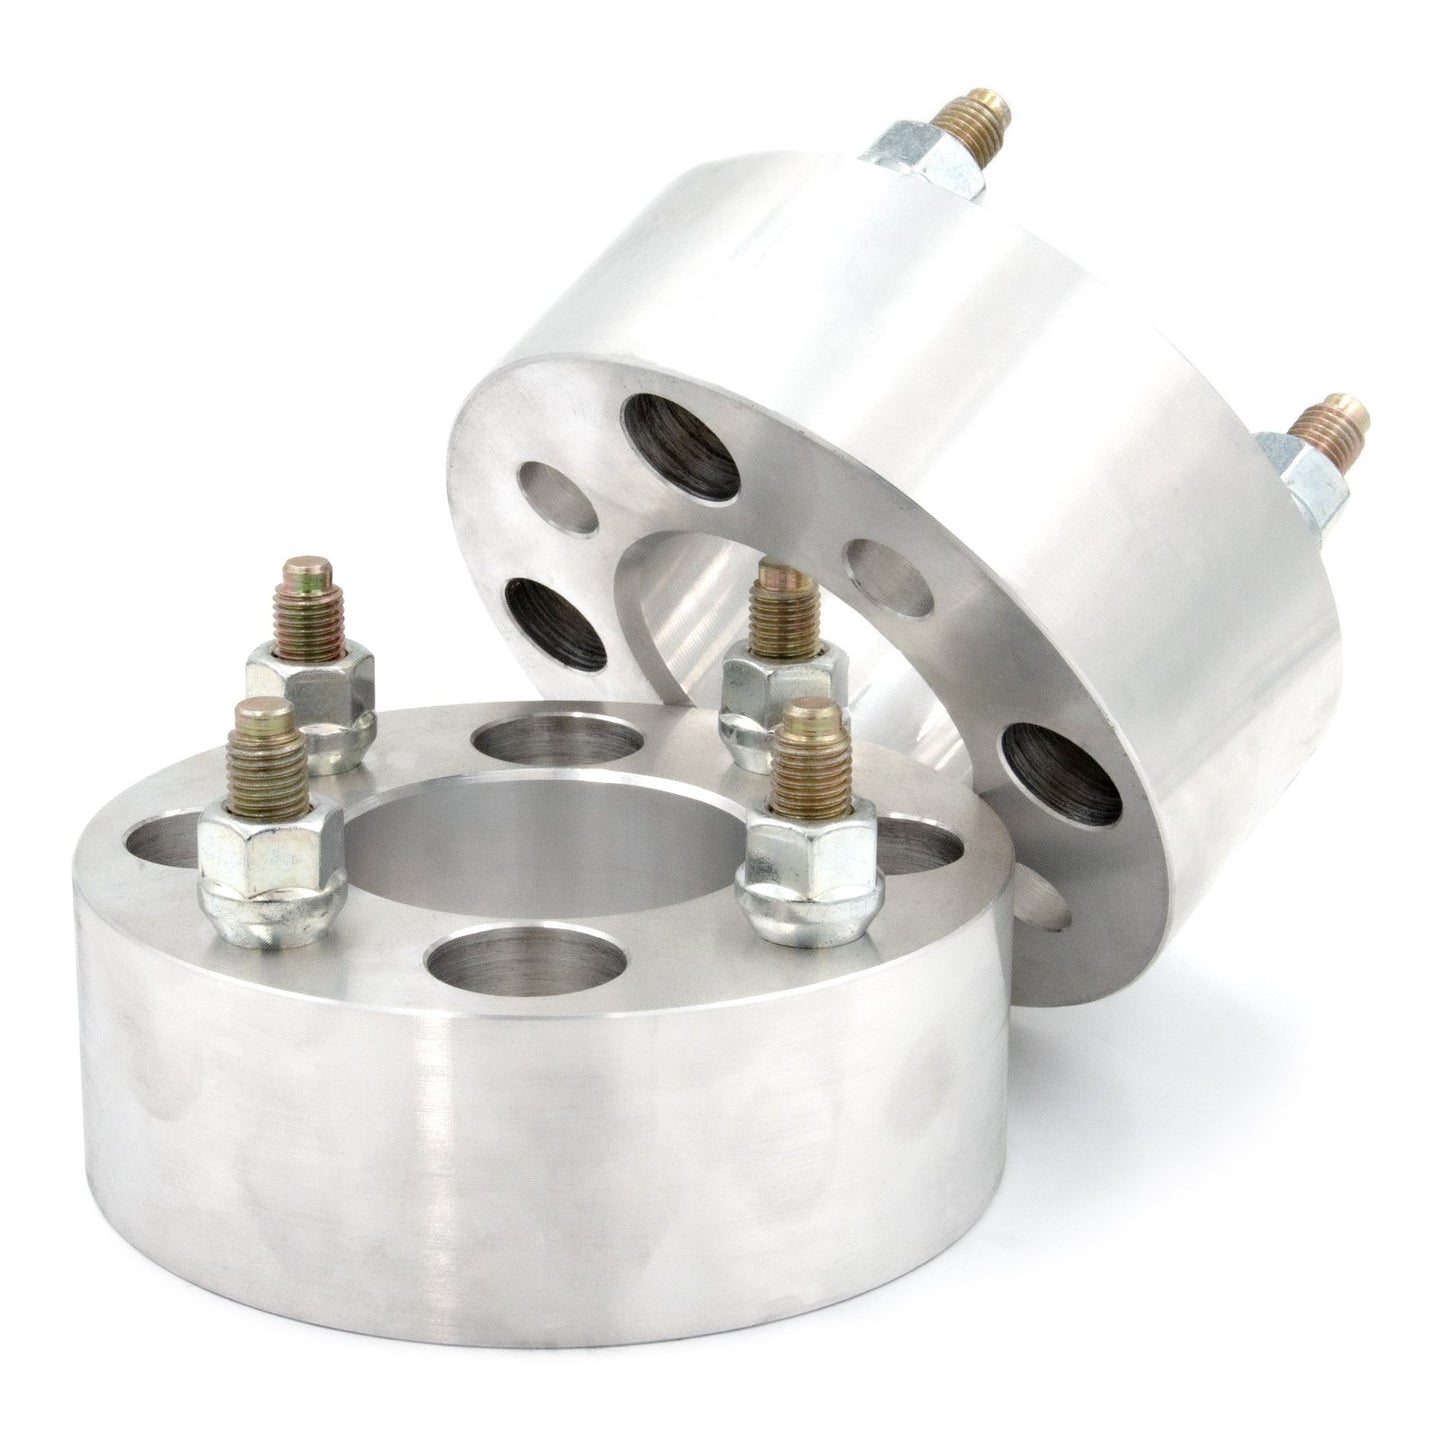 4x144 to 4x110 Wheel Spacer/Adapter - Thickness: 1"- 4"